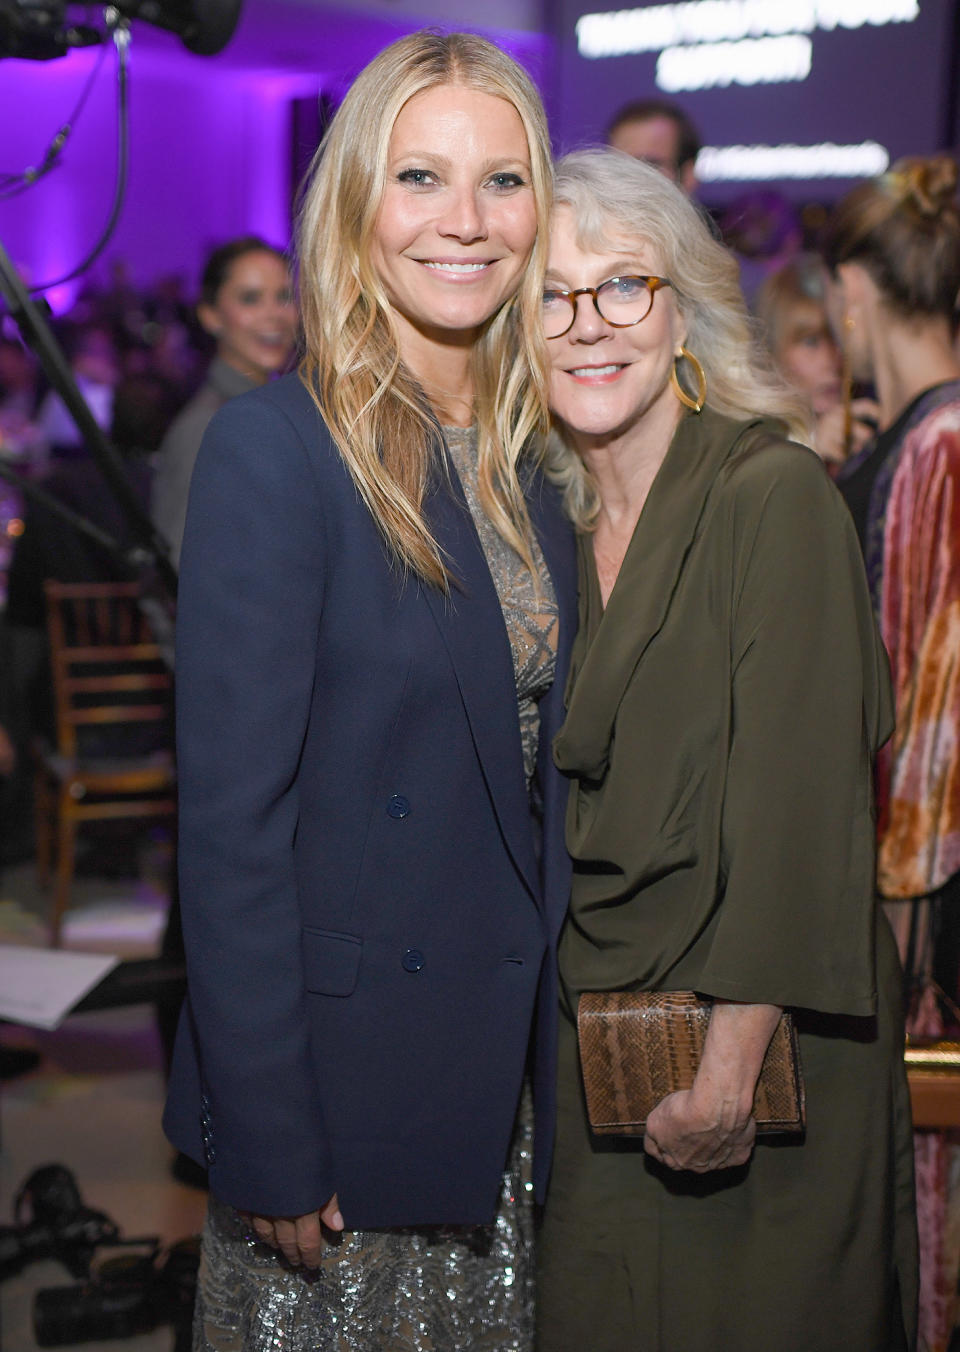 Gwyneth Paltrow’s Mom Blythe Danner Loves Being a Grandma: The Kids Get 'Enough Rules at Home'